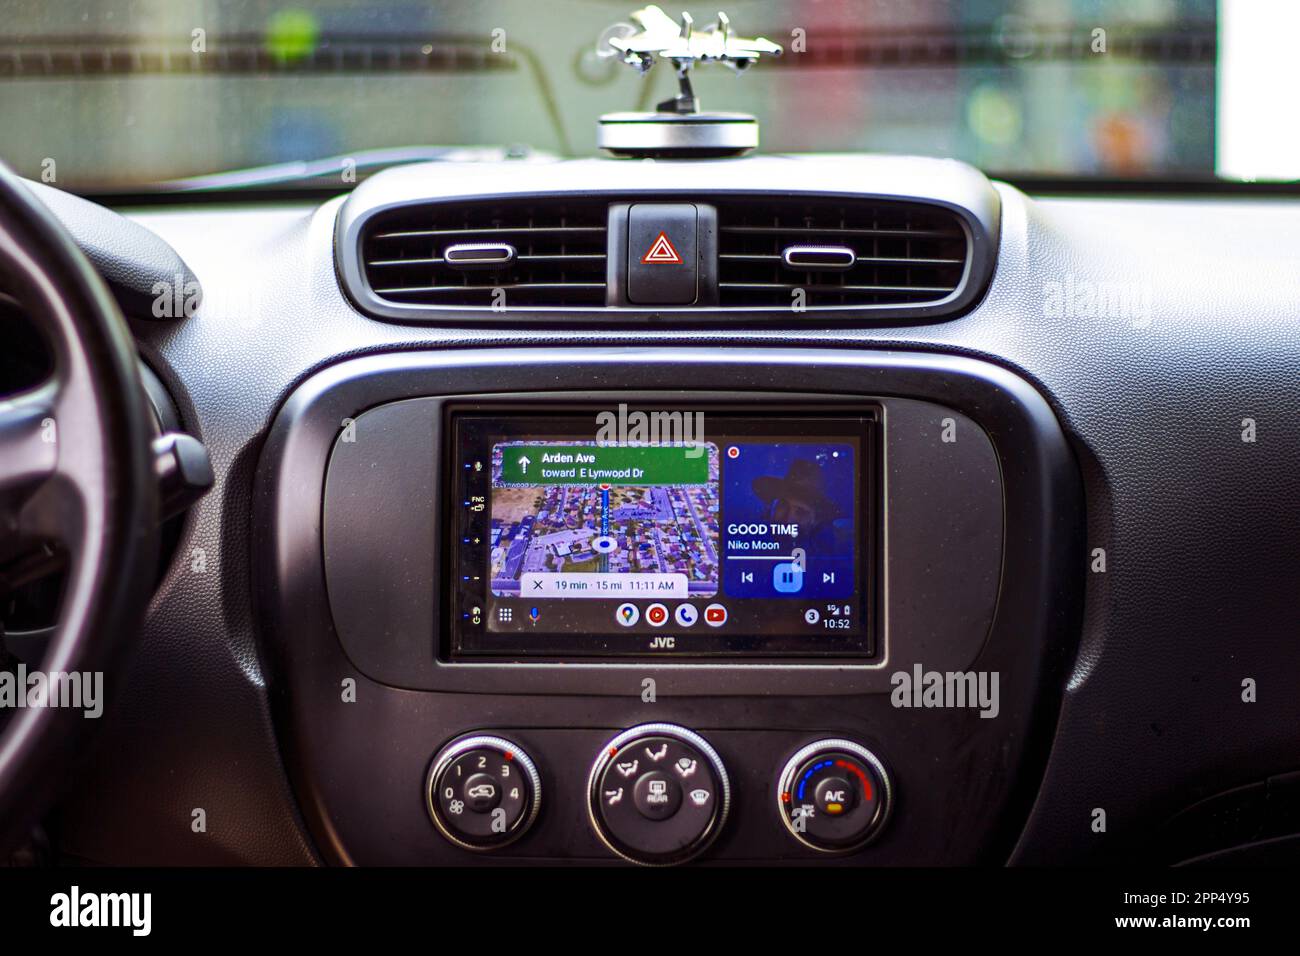 Transform your 2015 Kia Soul with a state-of-the-art JVC stereo system and Android Auto integration, featuring seamless navigation, and music Stock Photo